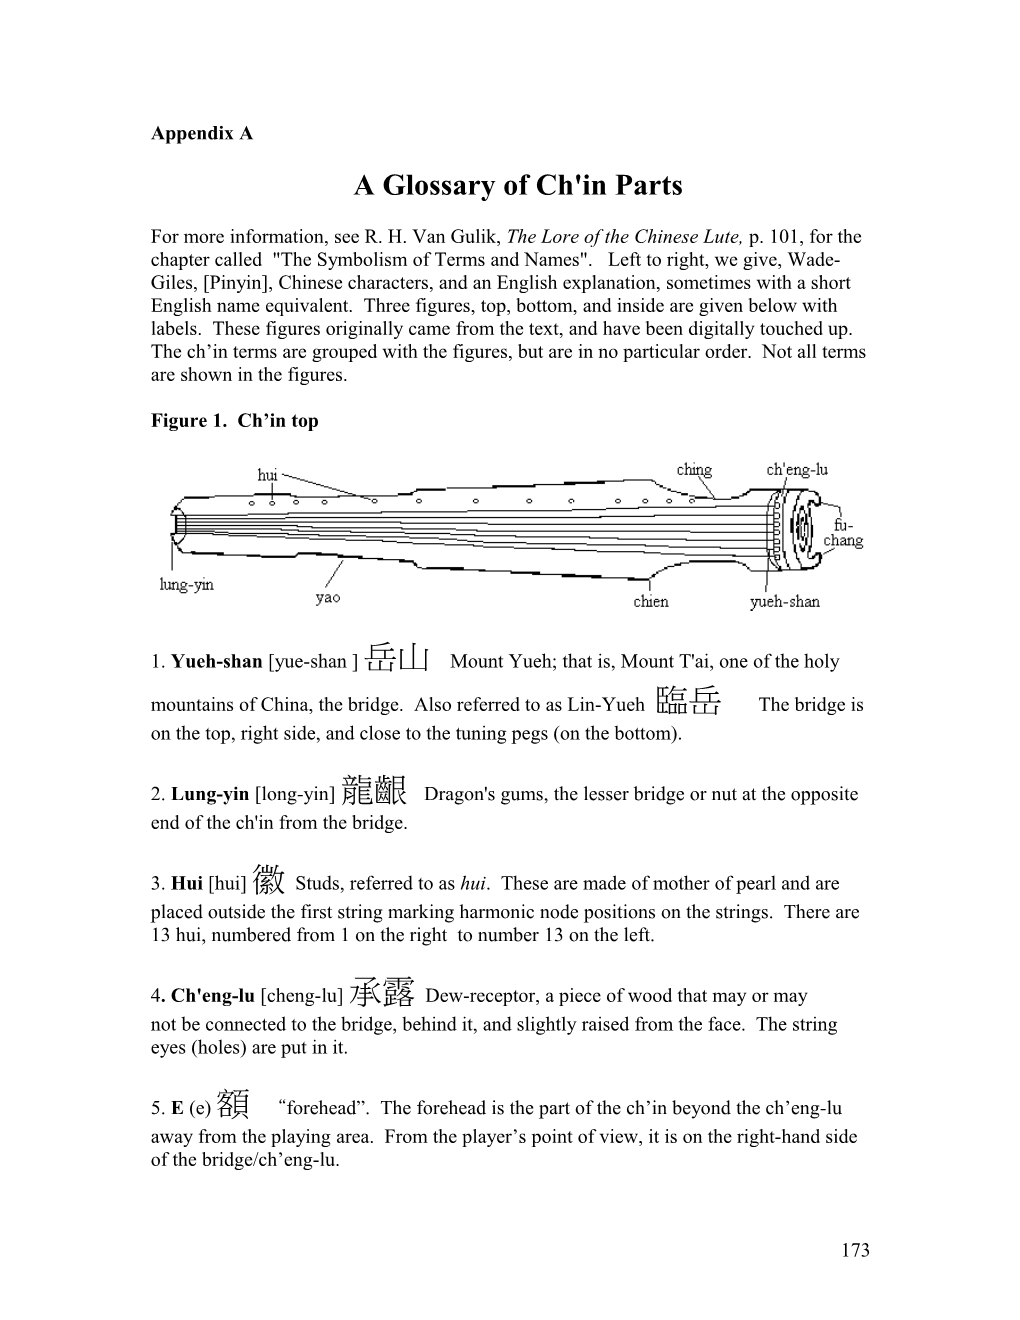 Glossary of Ch'in Parts